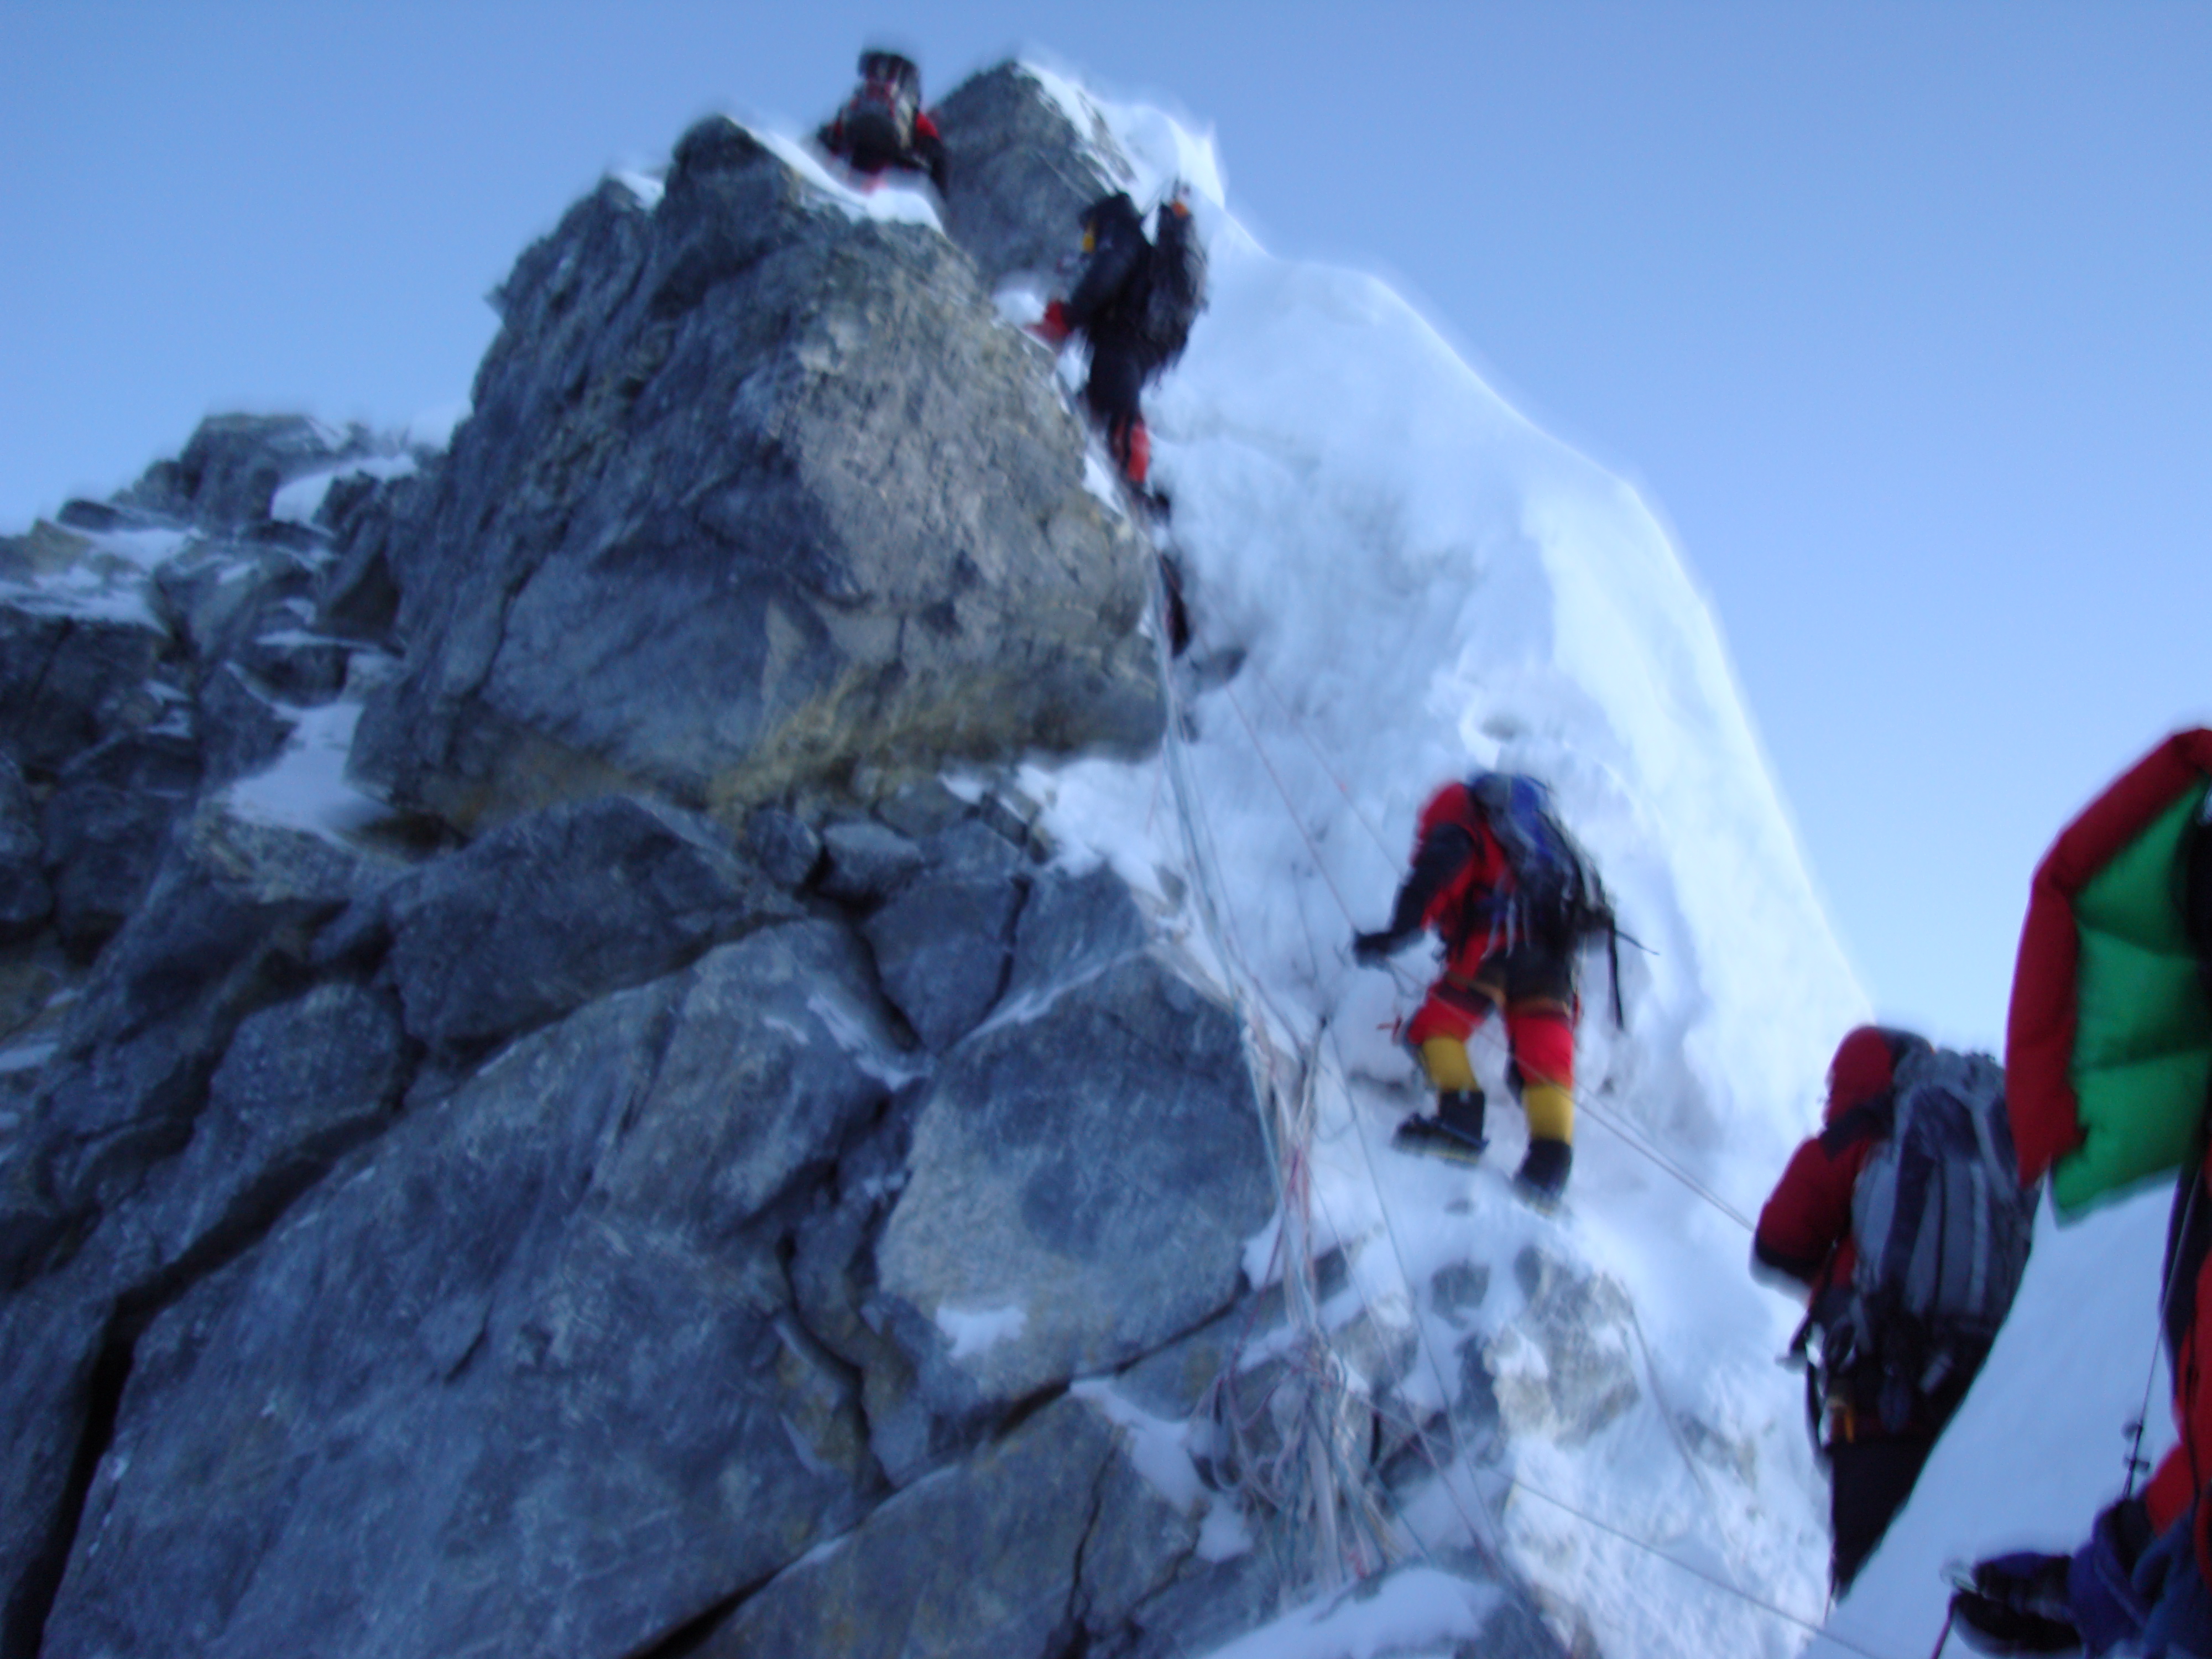 The Hillary step on Mount Everest